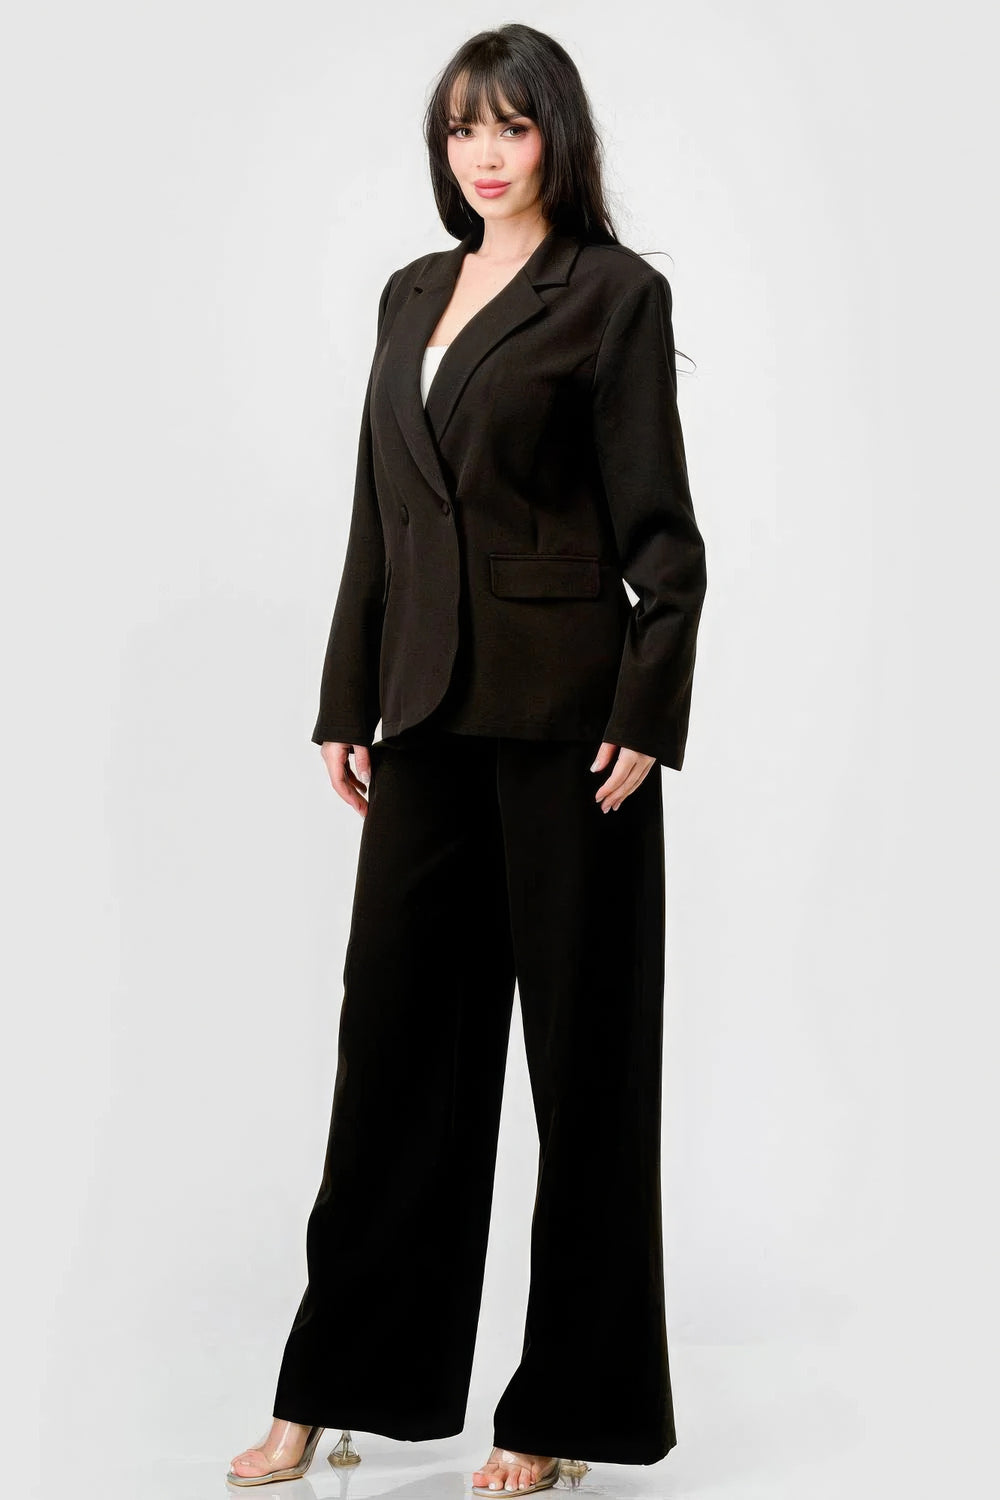 Luxe Stretch Woven Loose Fit Blazer And Wide Legs Pants Semi Formal Set - bertofonsi